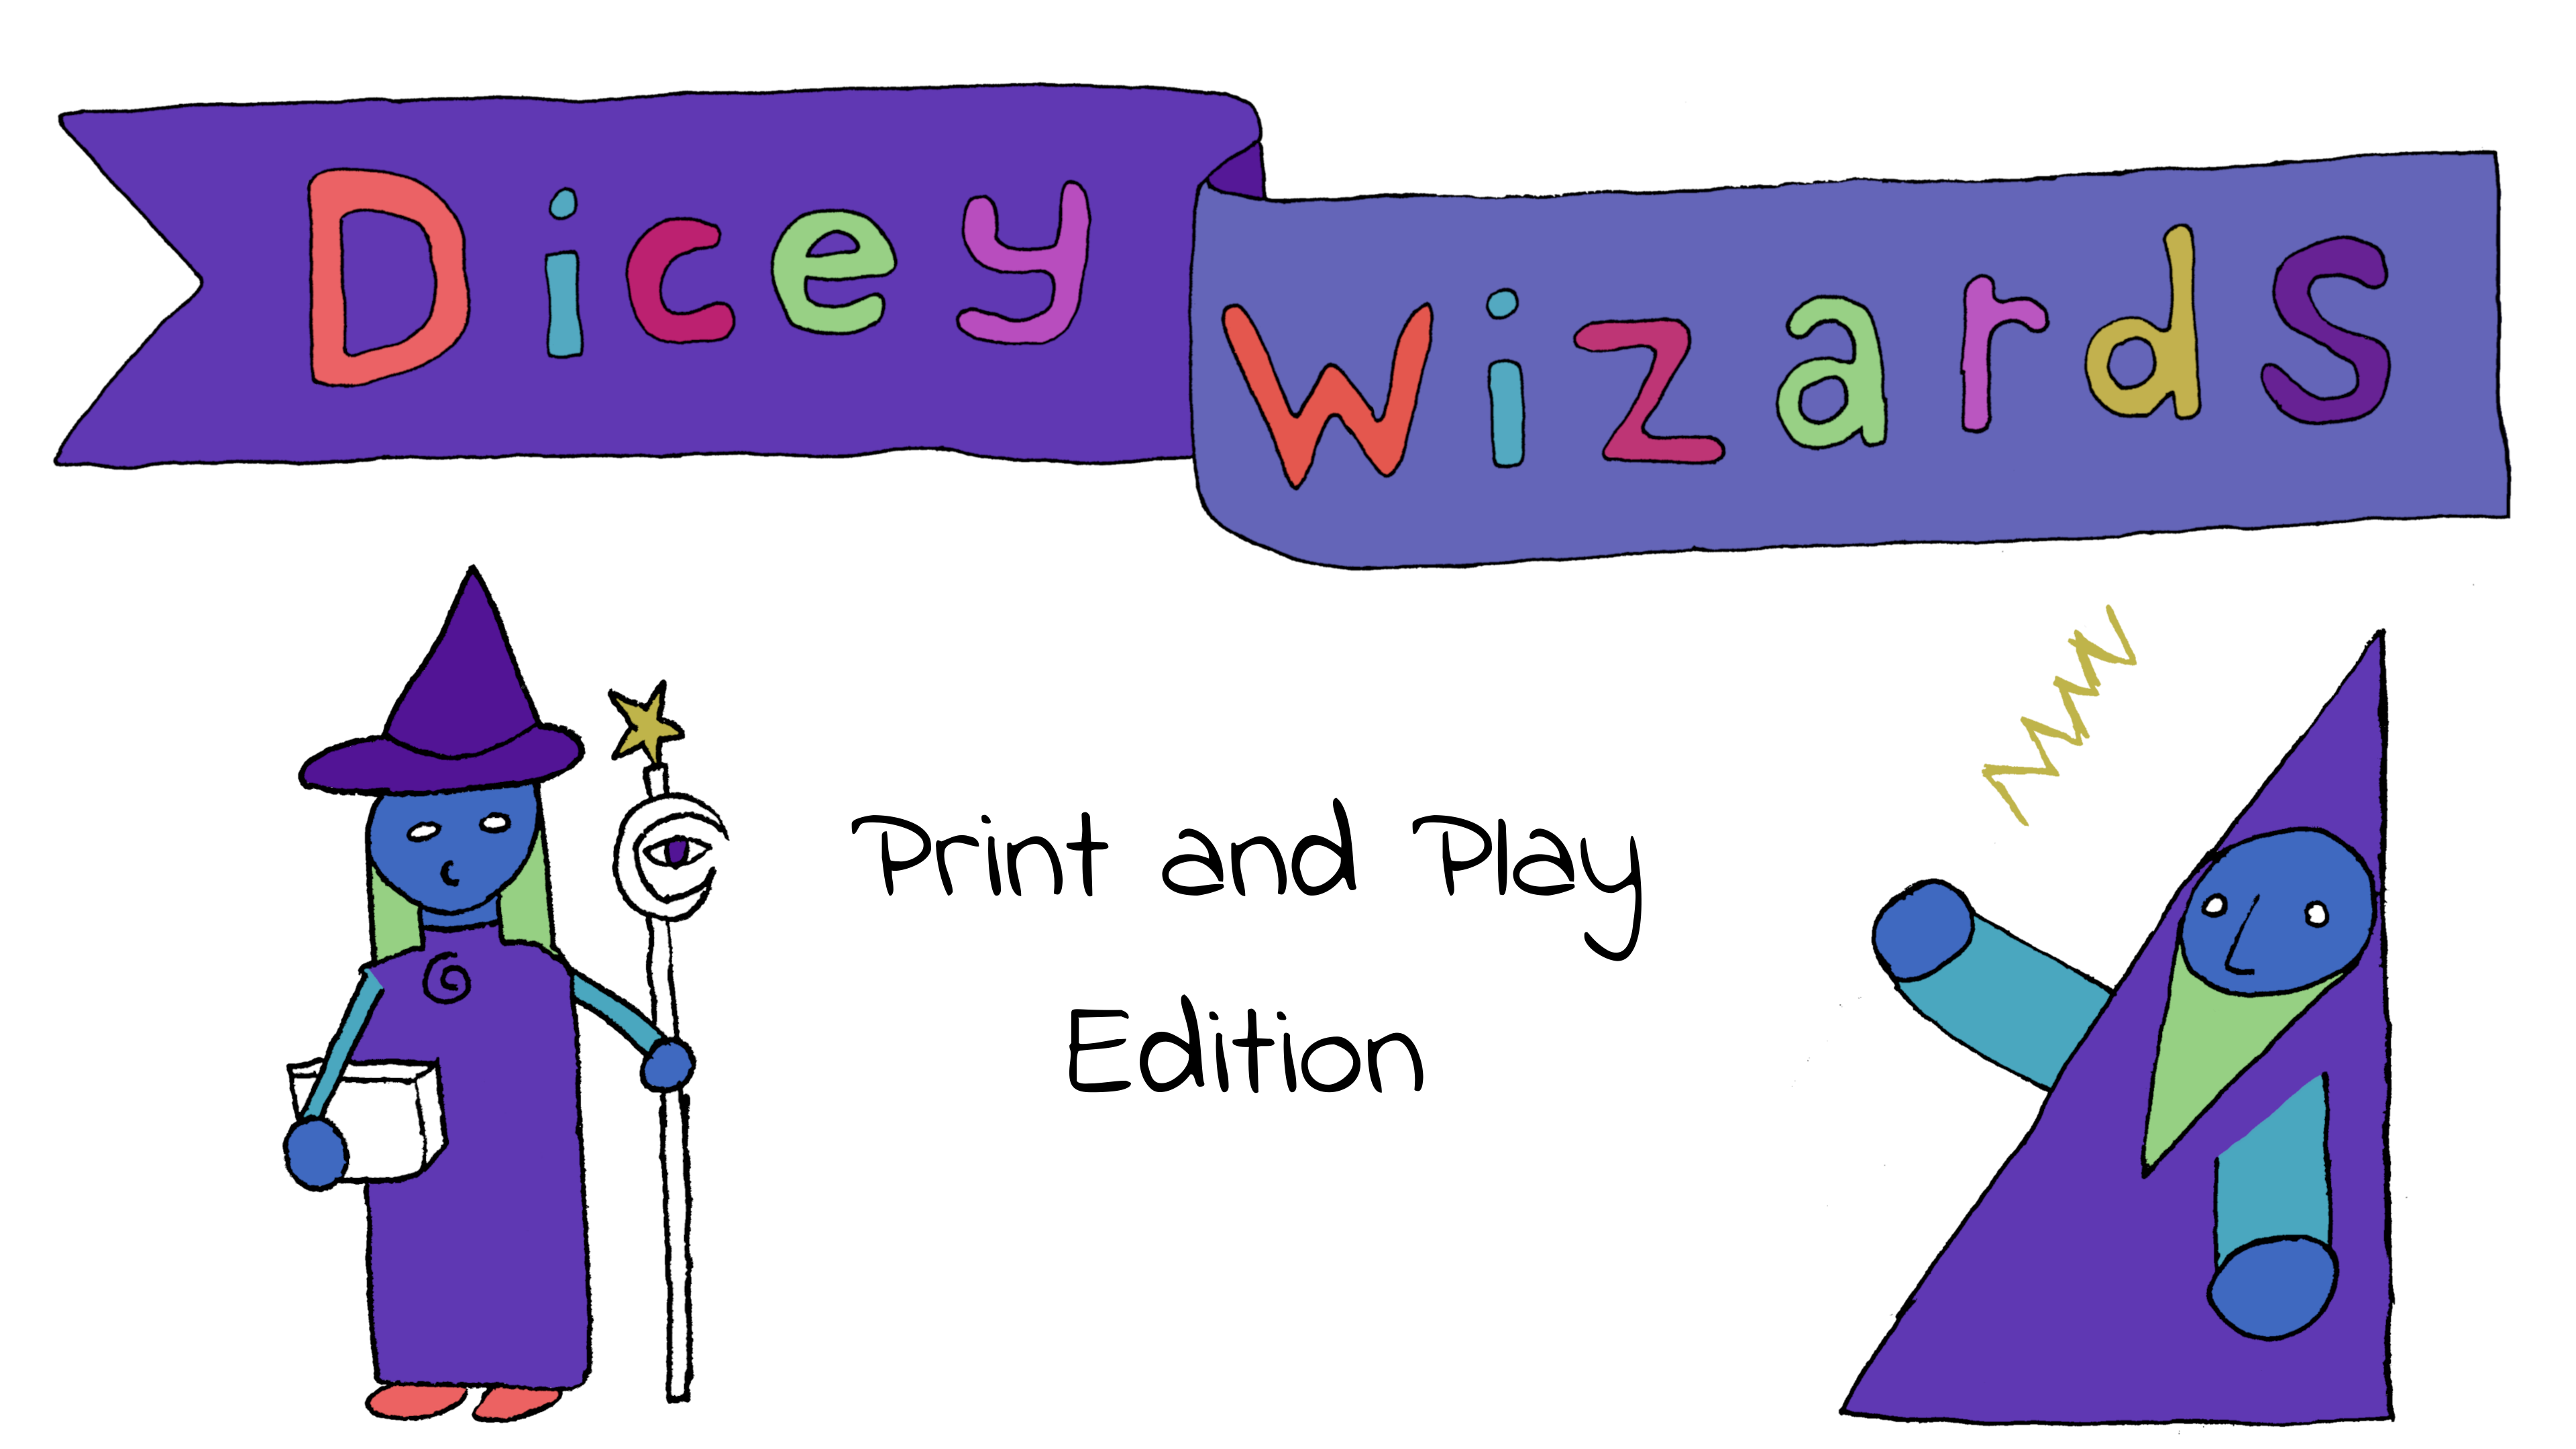 Dicey Wizards